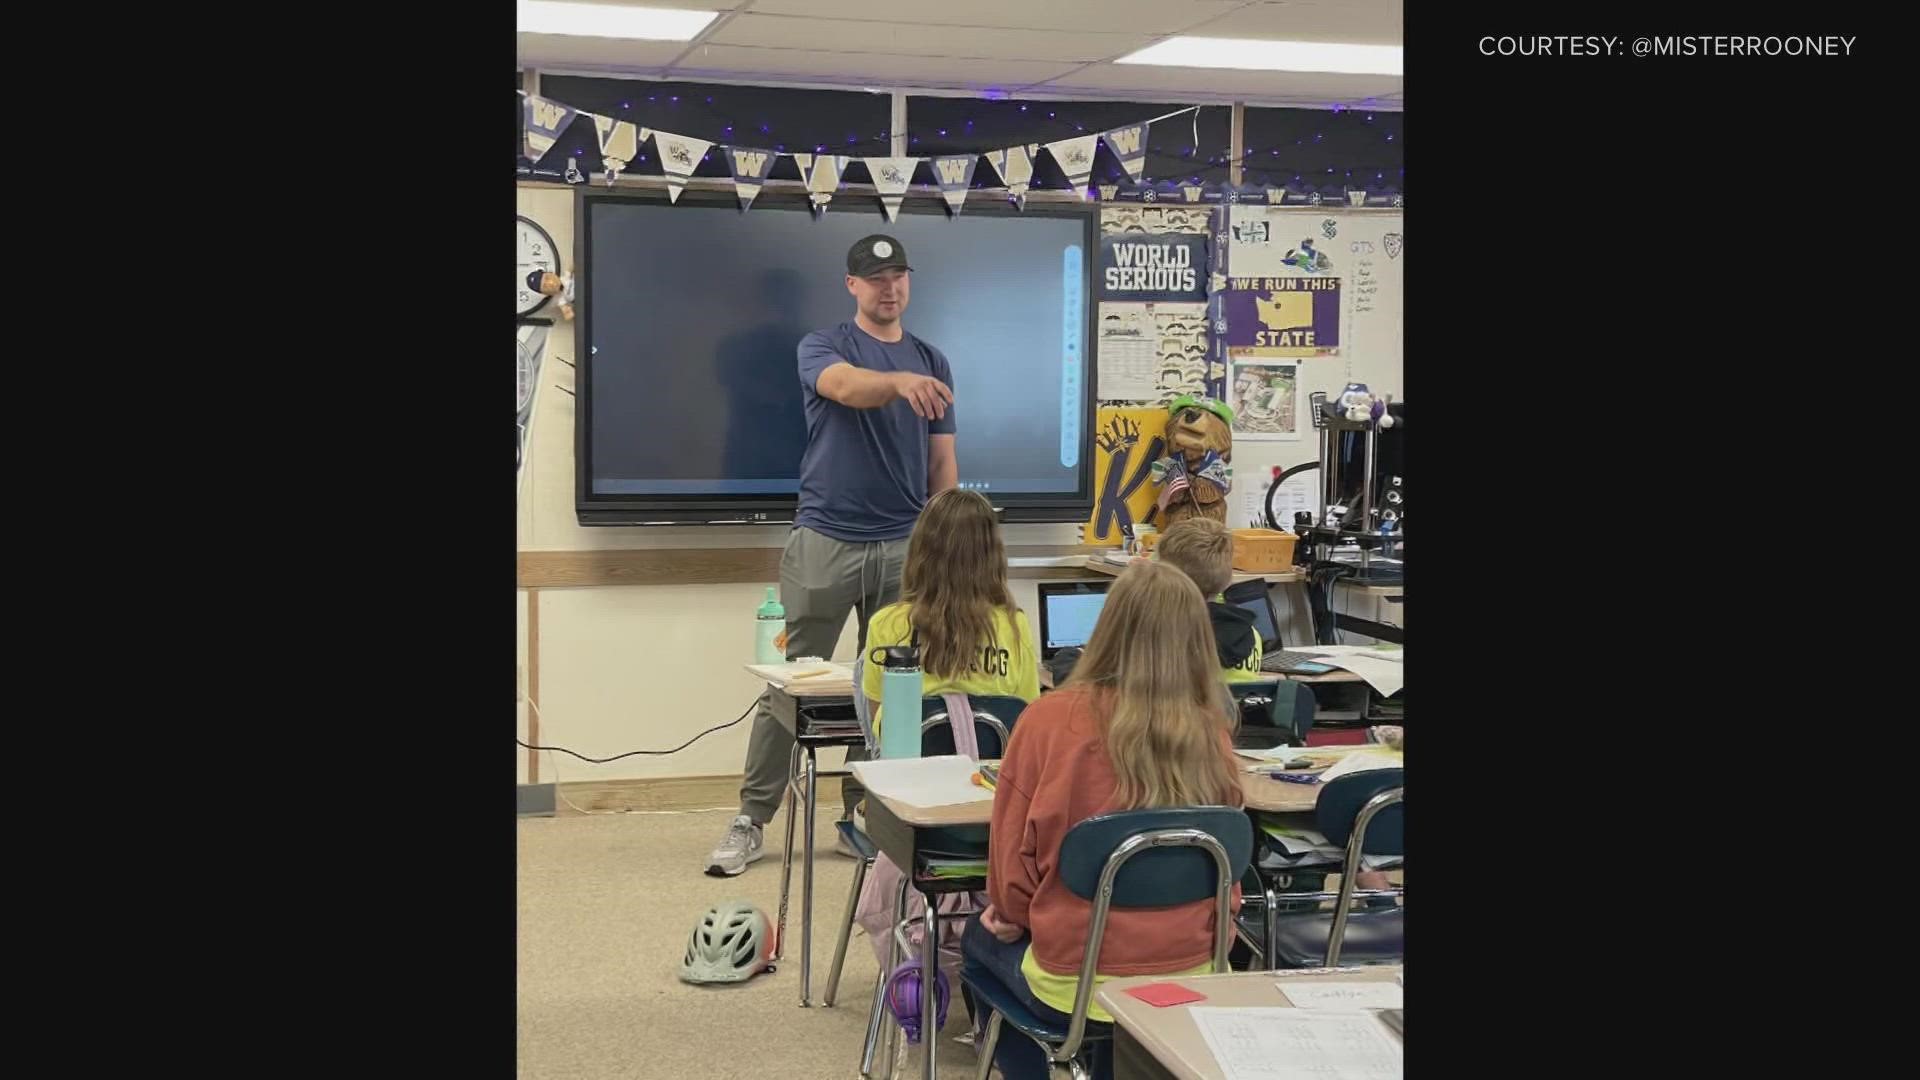 A 5th grade class at Cascade Elementary went viral celebrating Cal Raleigh's walkoff homer that put the M's in the playoffs. So "Big Dumper" himself surprised them.